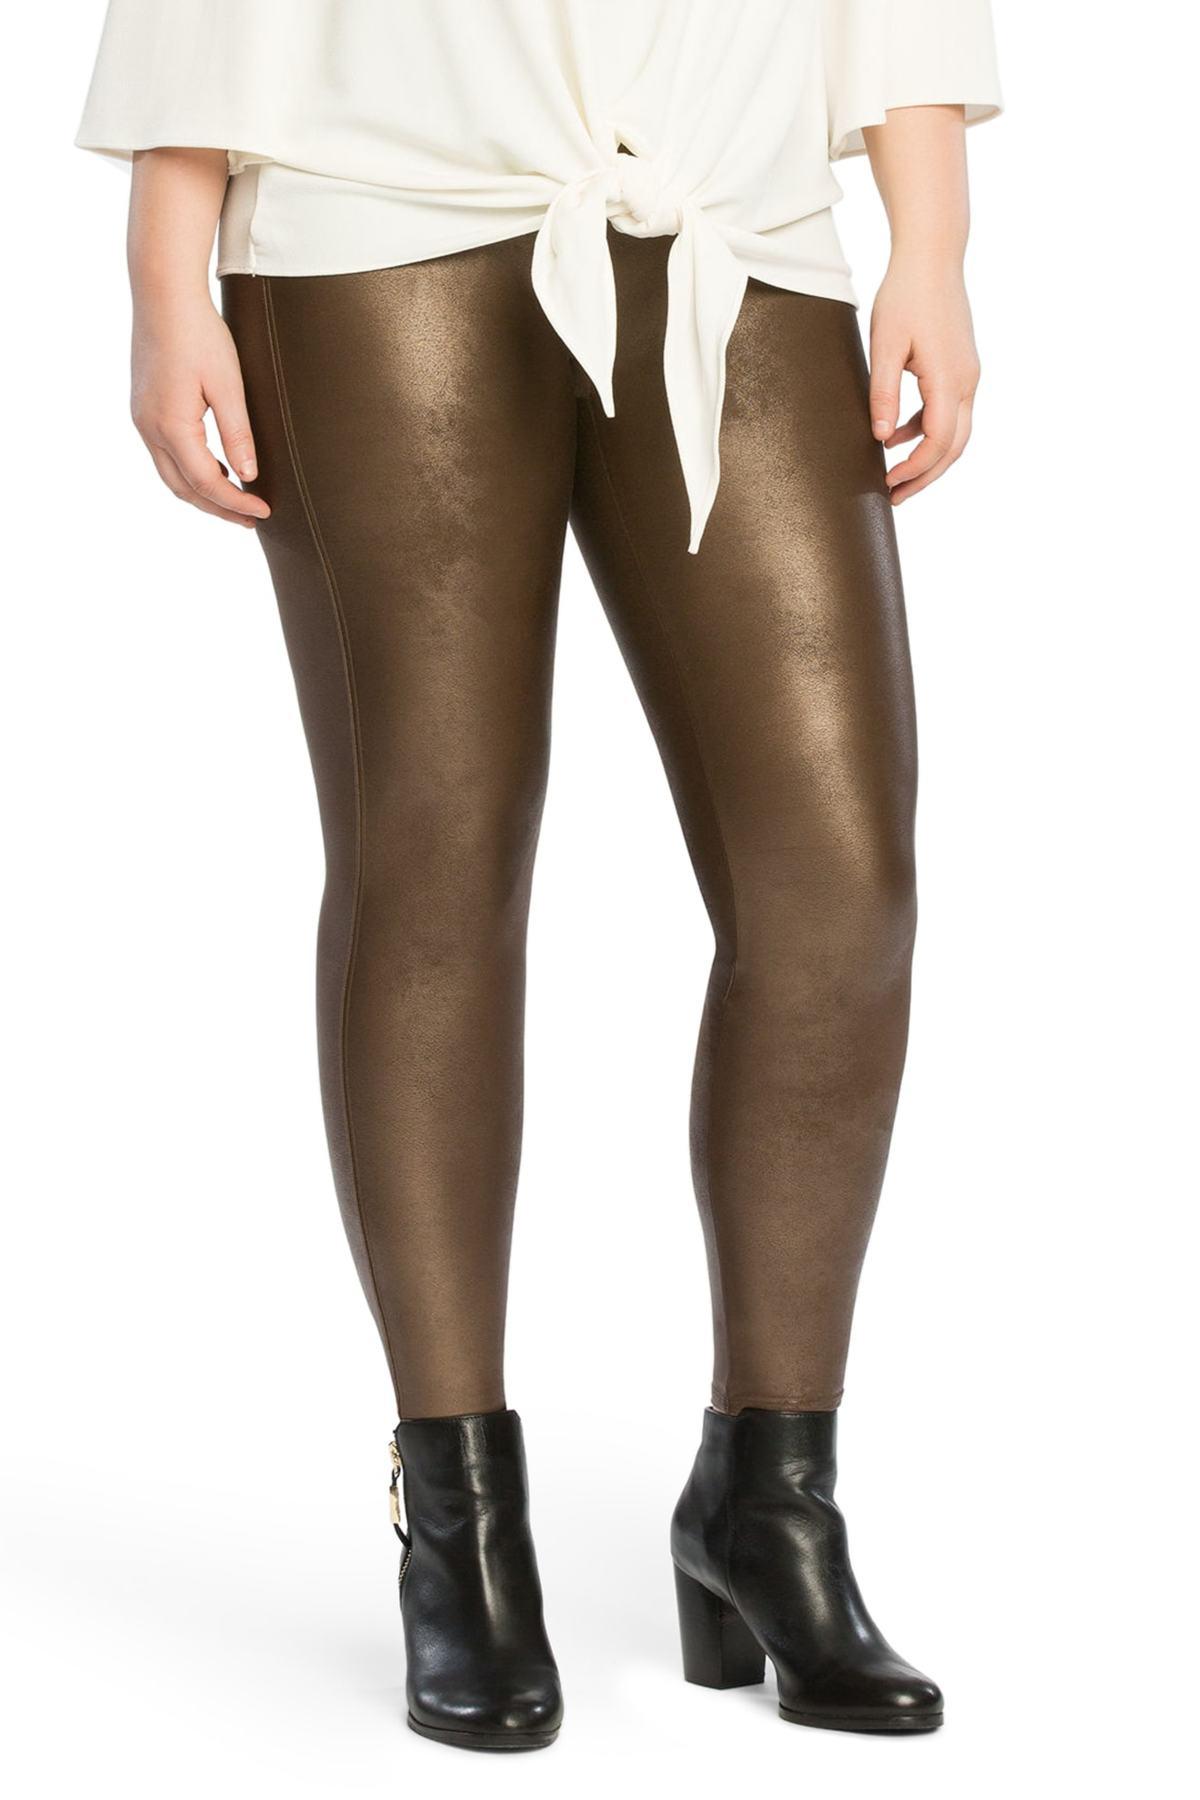 Spanx Faux Leather Leggings in Brown